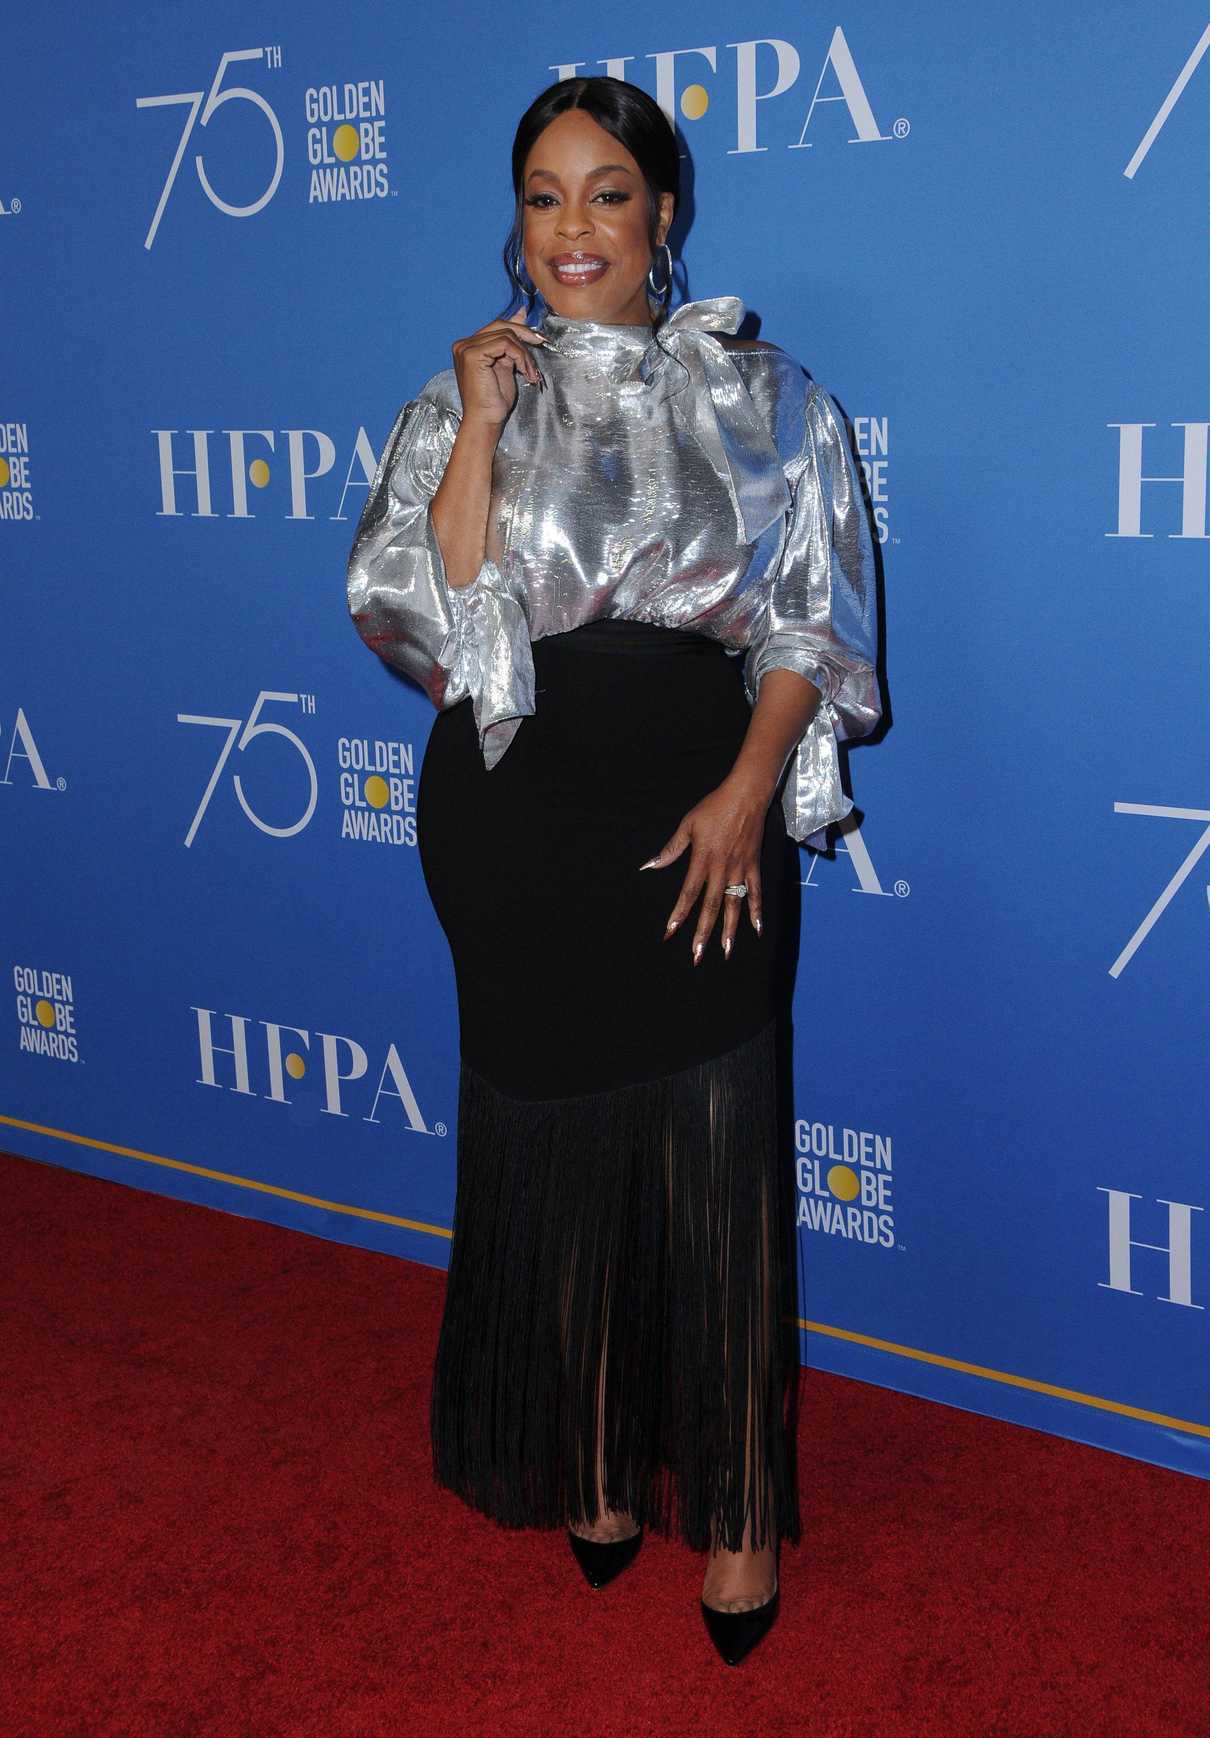 Niecy Nash at the Golden Globes 75th Anniversary Special Screening at ...